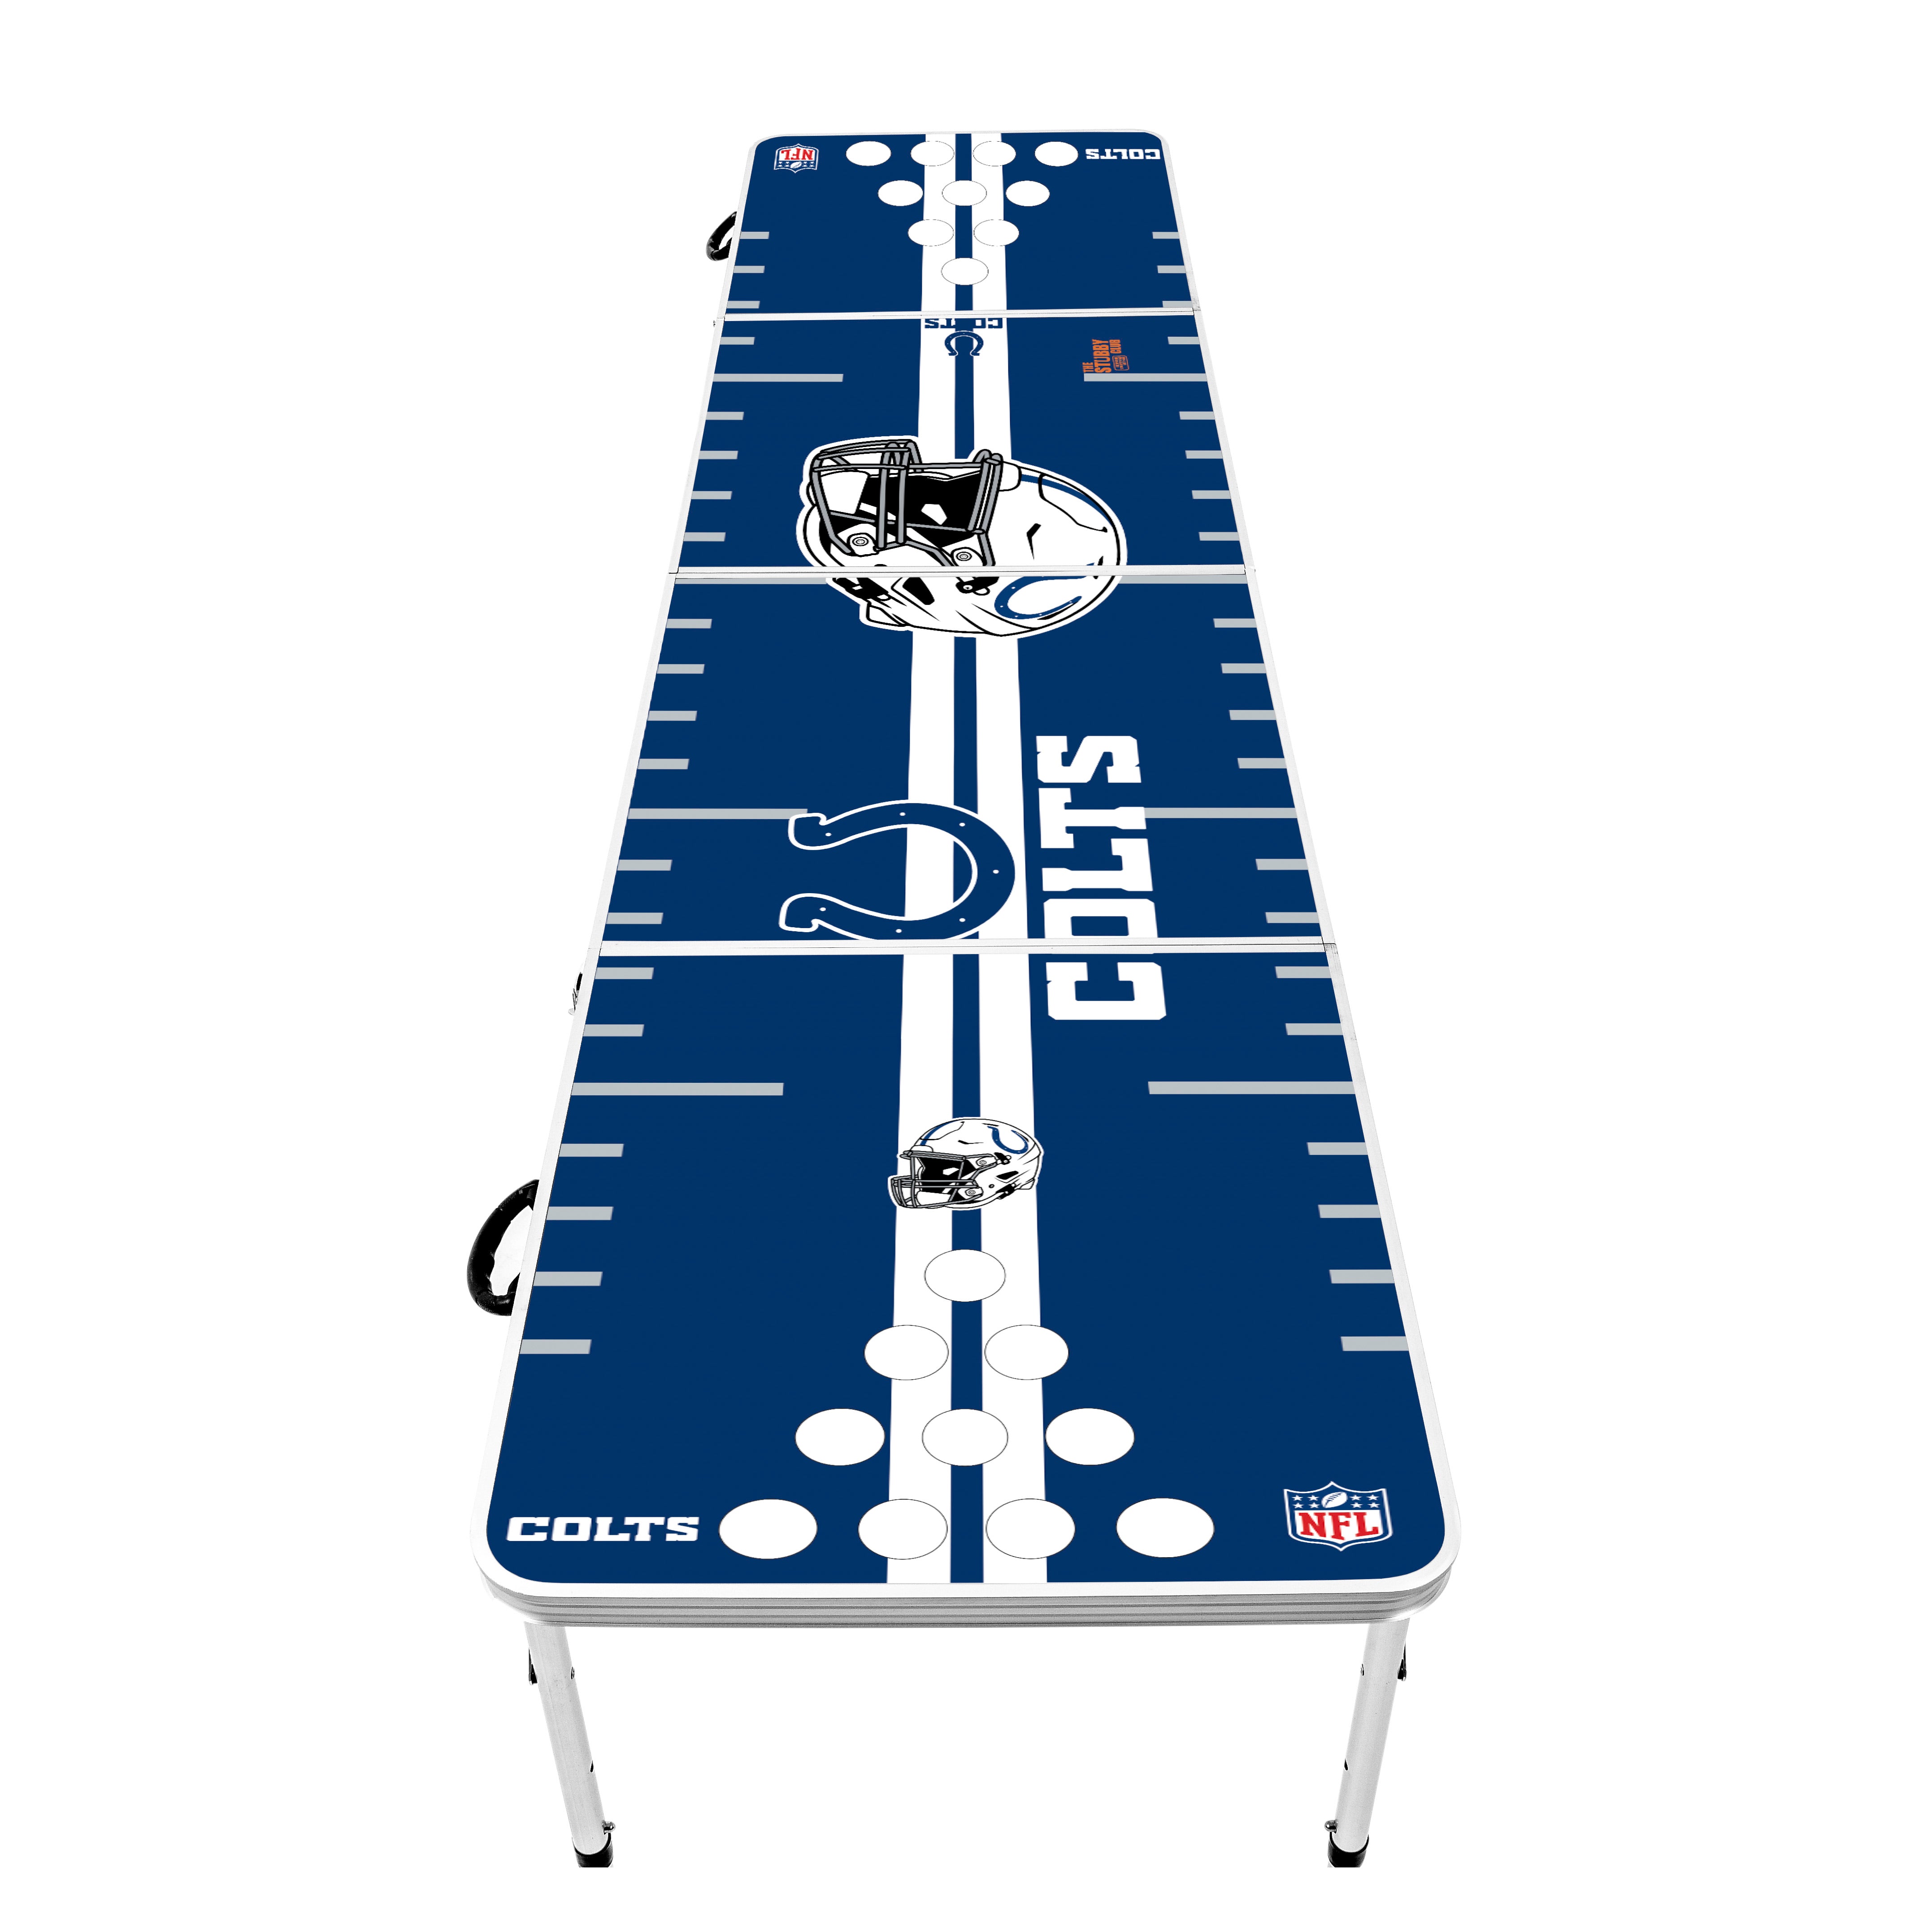 Indianapolis Colts NFL Beer Pong Table